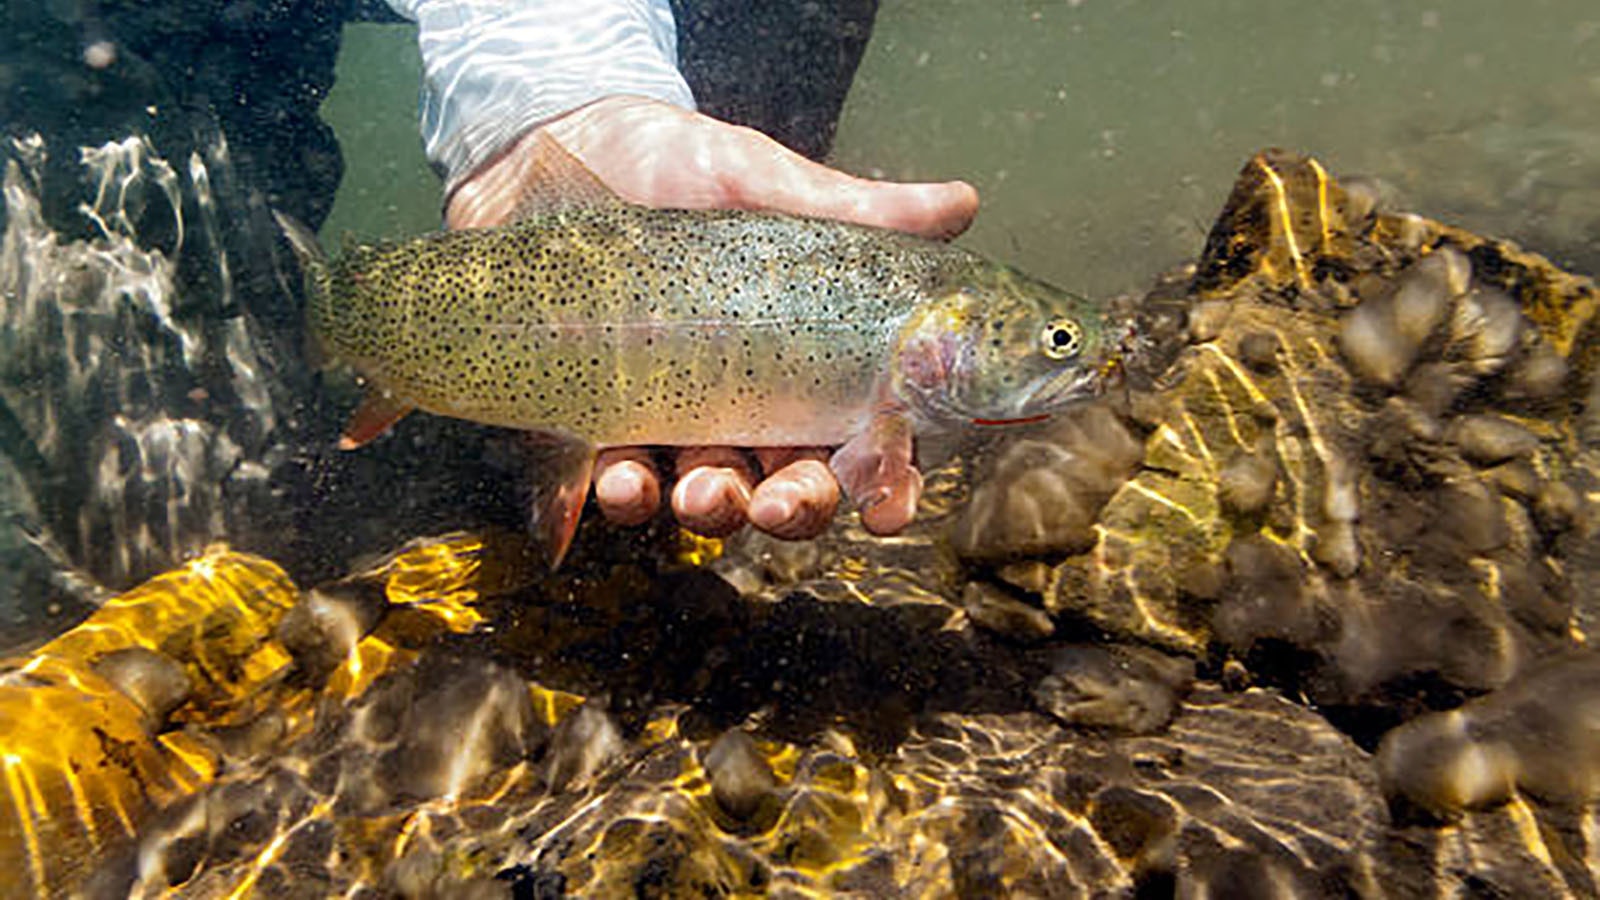 Feds Want To Kill Rainbow Trout In Popular Yellowstone Wilderness